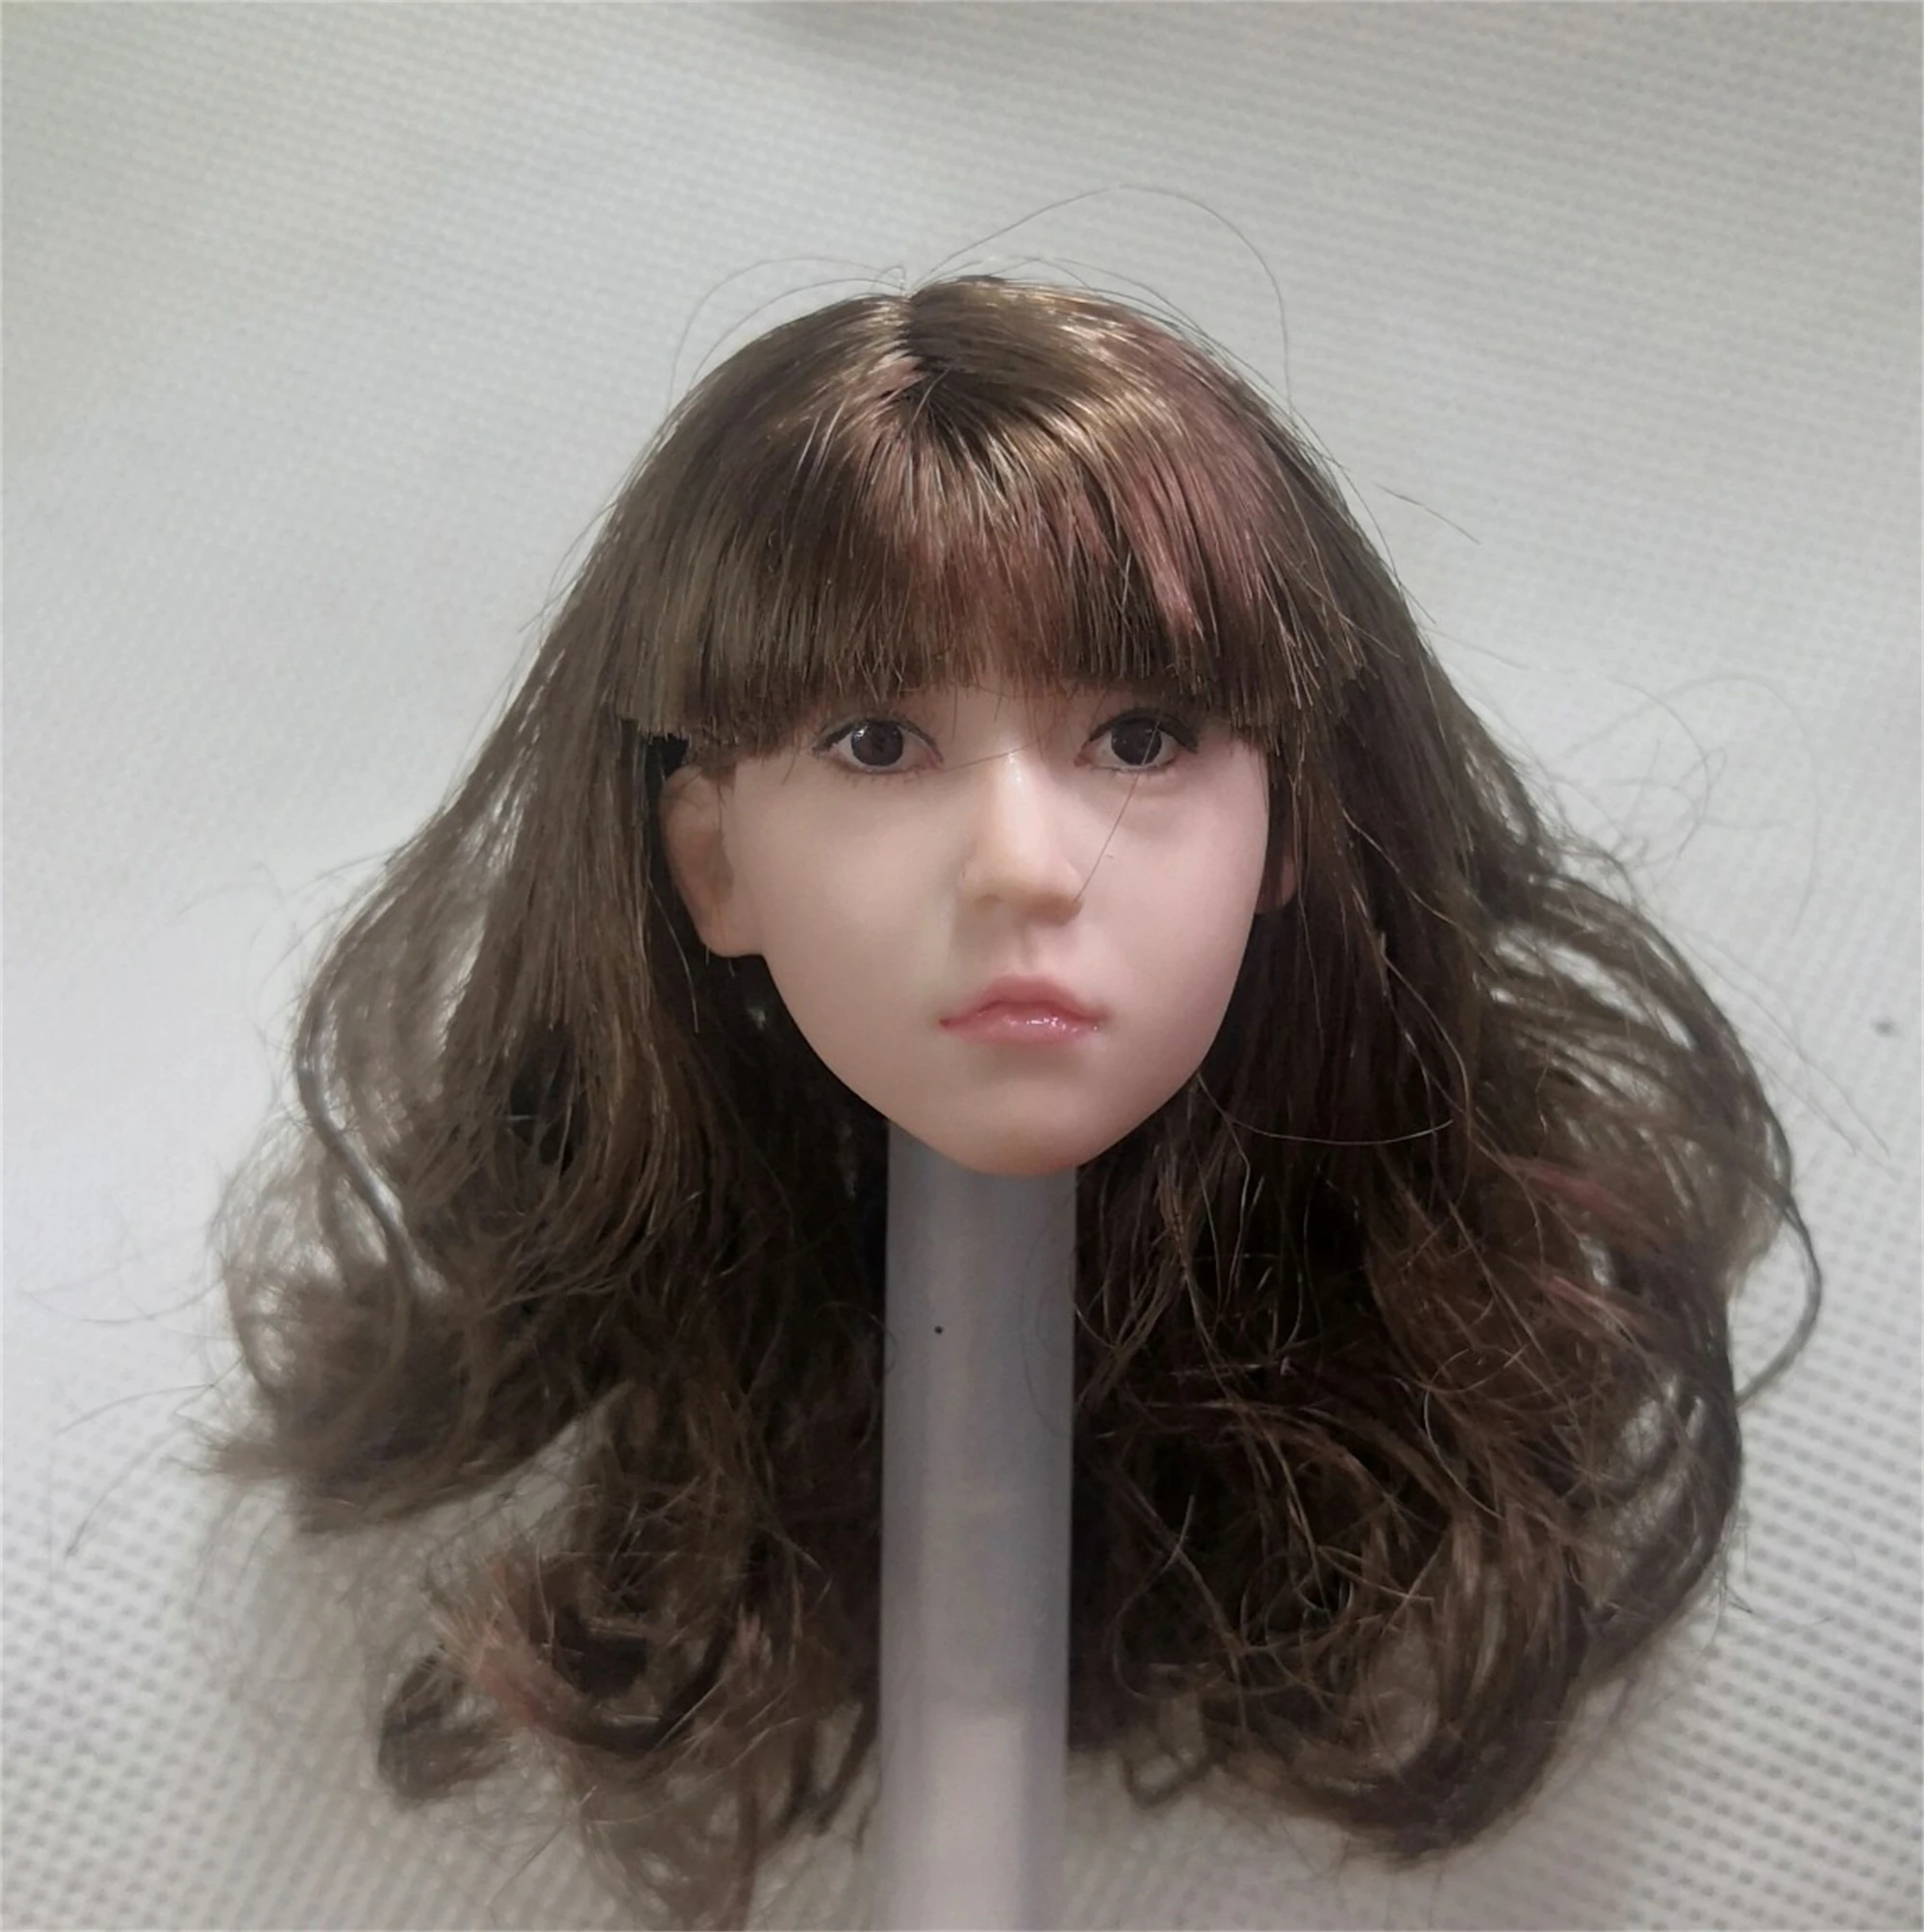 

1/6 Student Little Girl Qi Bangs Head Carved Model Fit for 12'' TBLeague Pale Action Figure Body